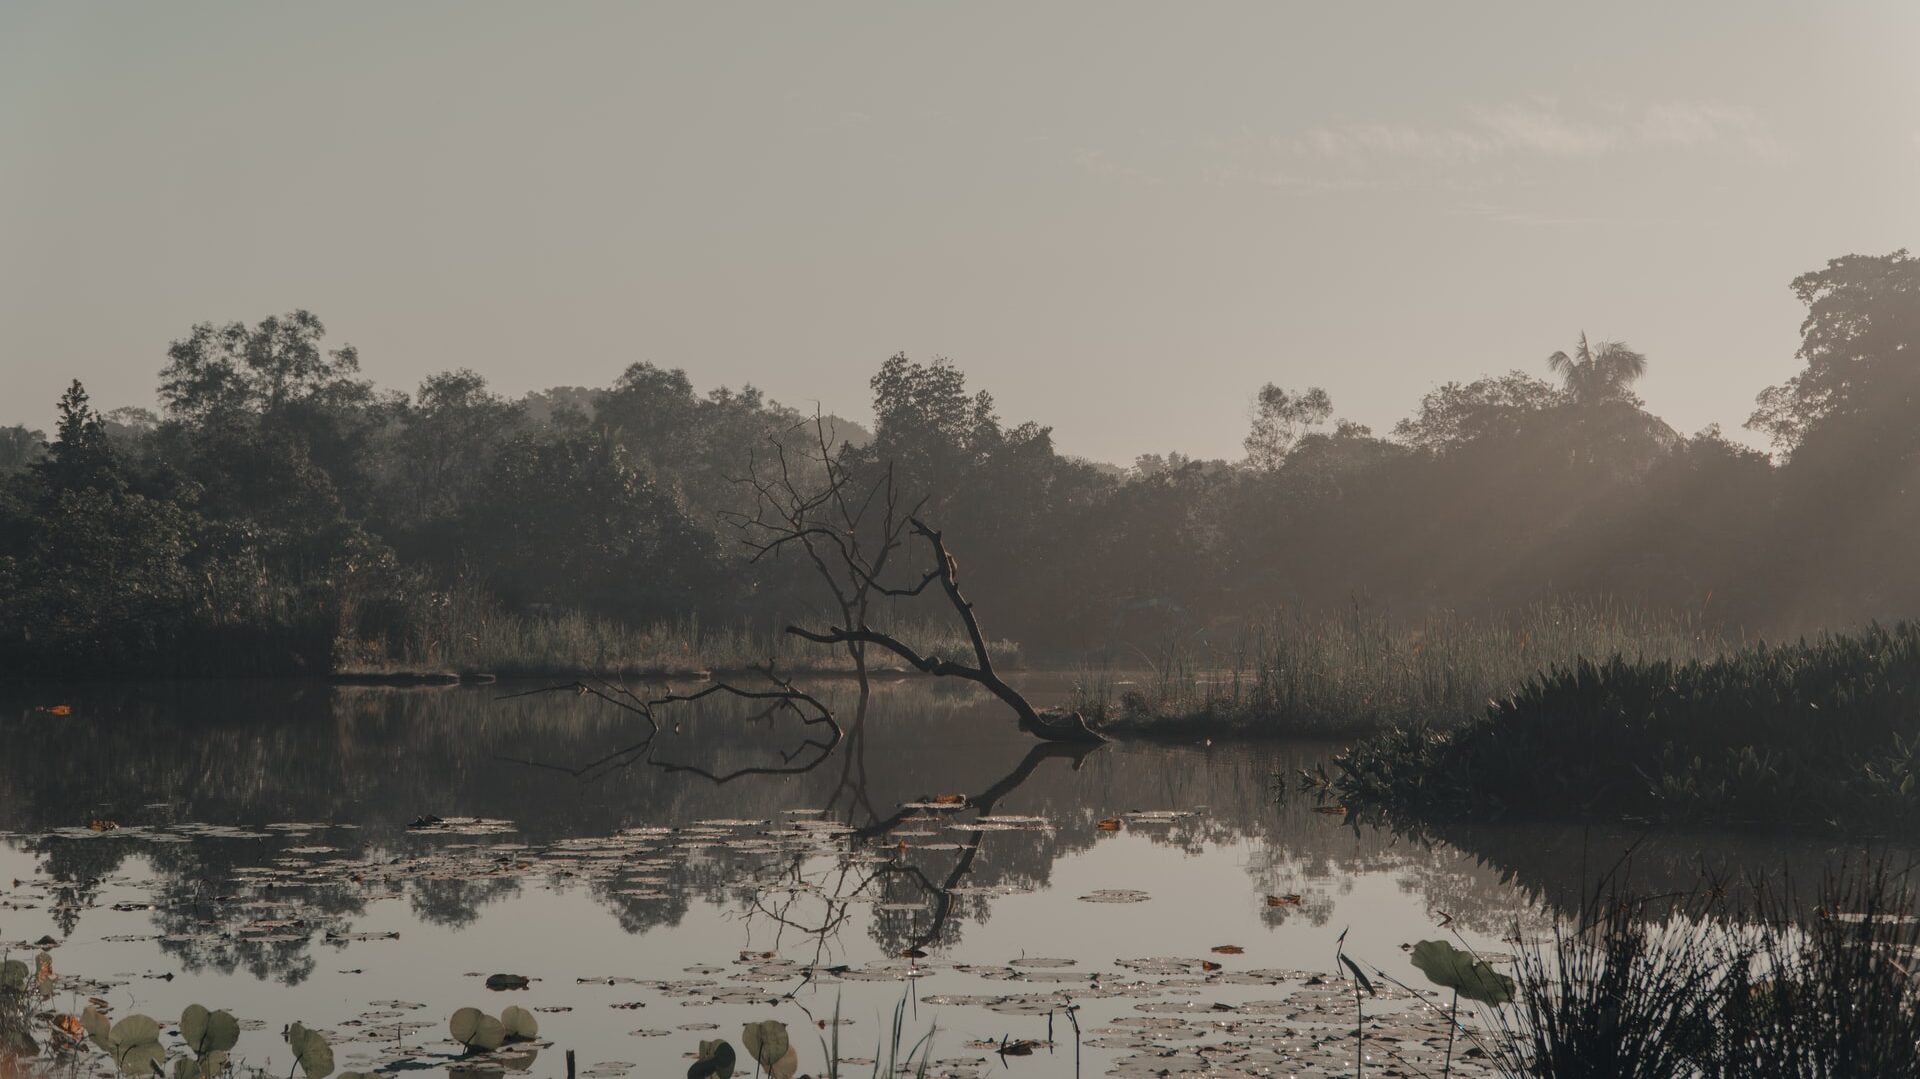 A swamp with murky waters and a dead tree jutting out from the water. In the background there is thick foliage.